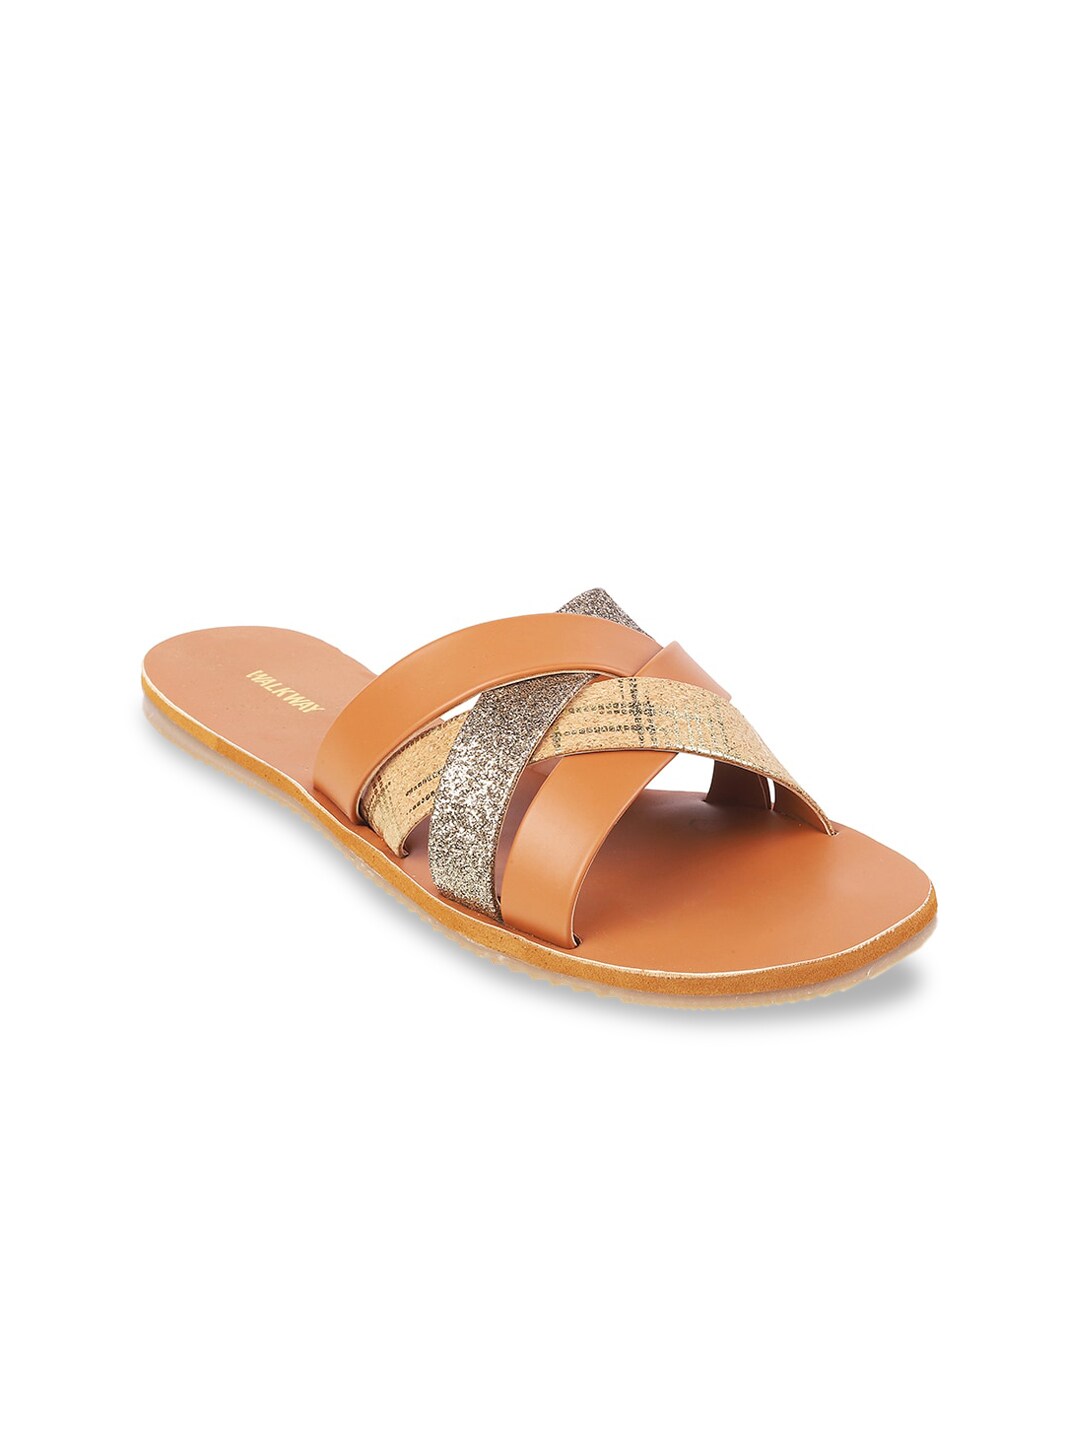 WALKWAY by Metro Women Tan Brown & Silver-Toned Embellished Open Toe Flats Price in India